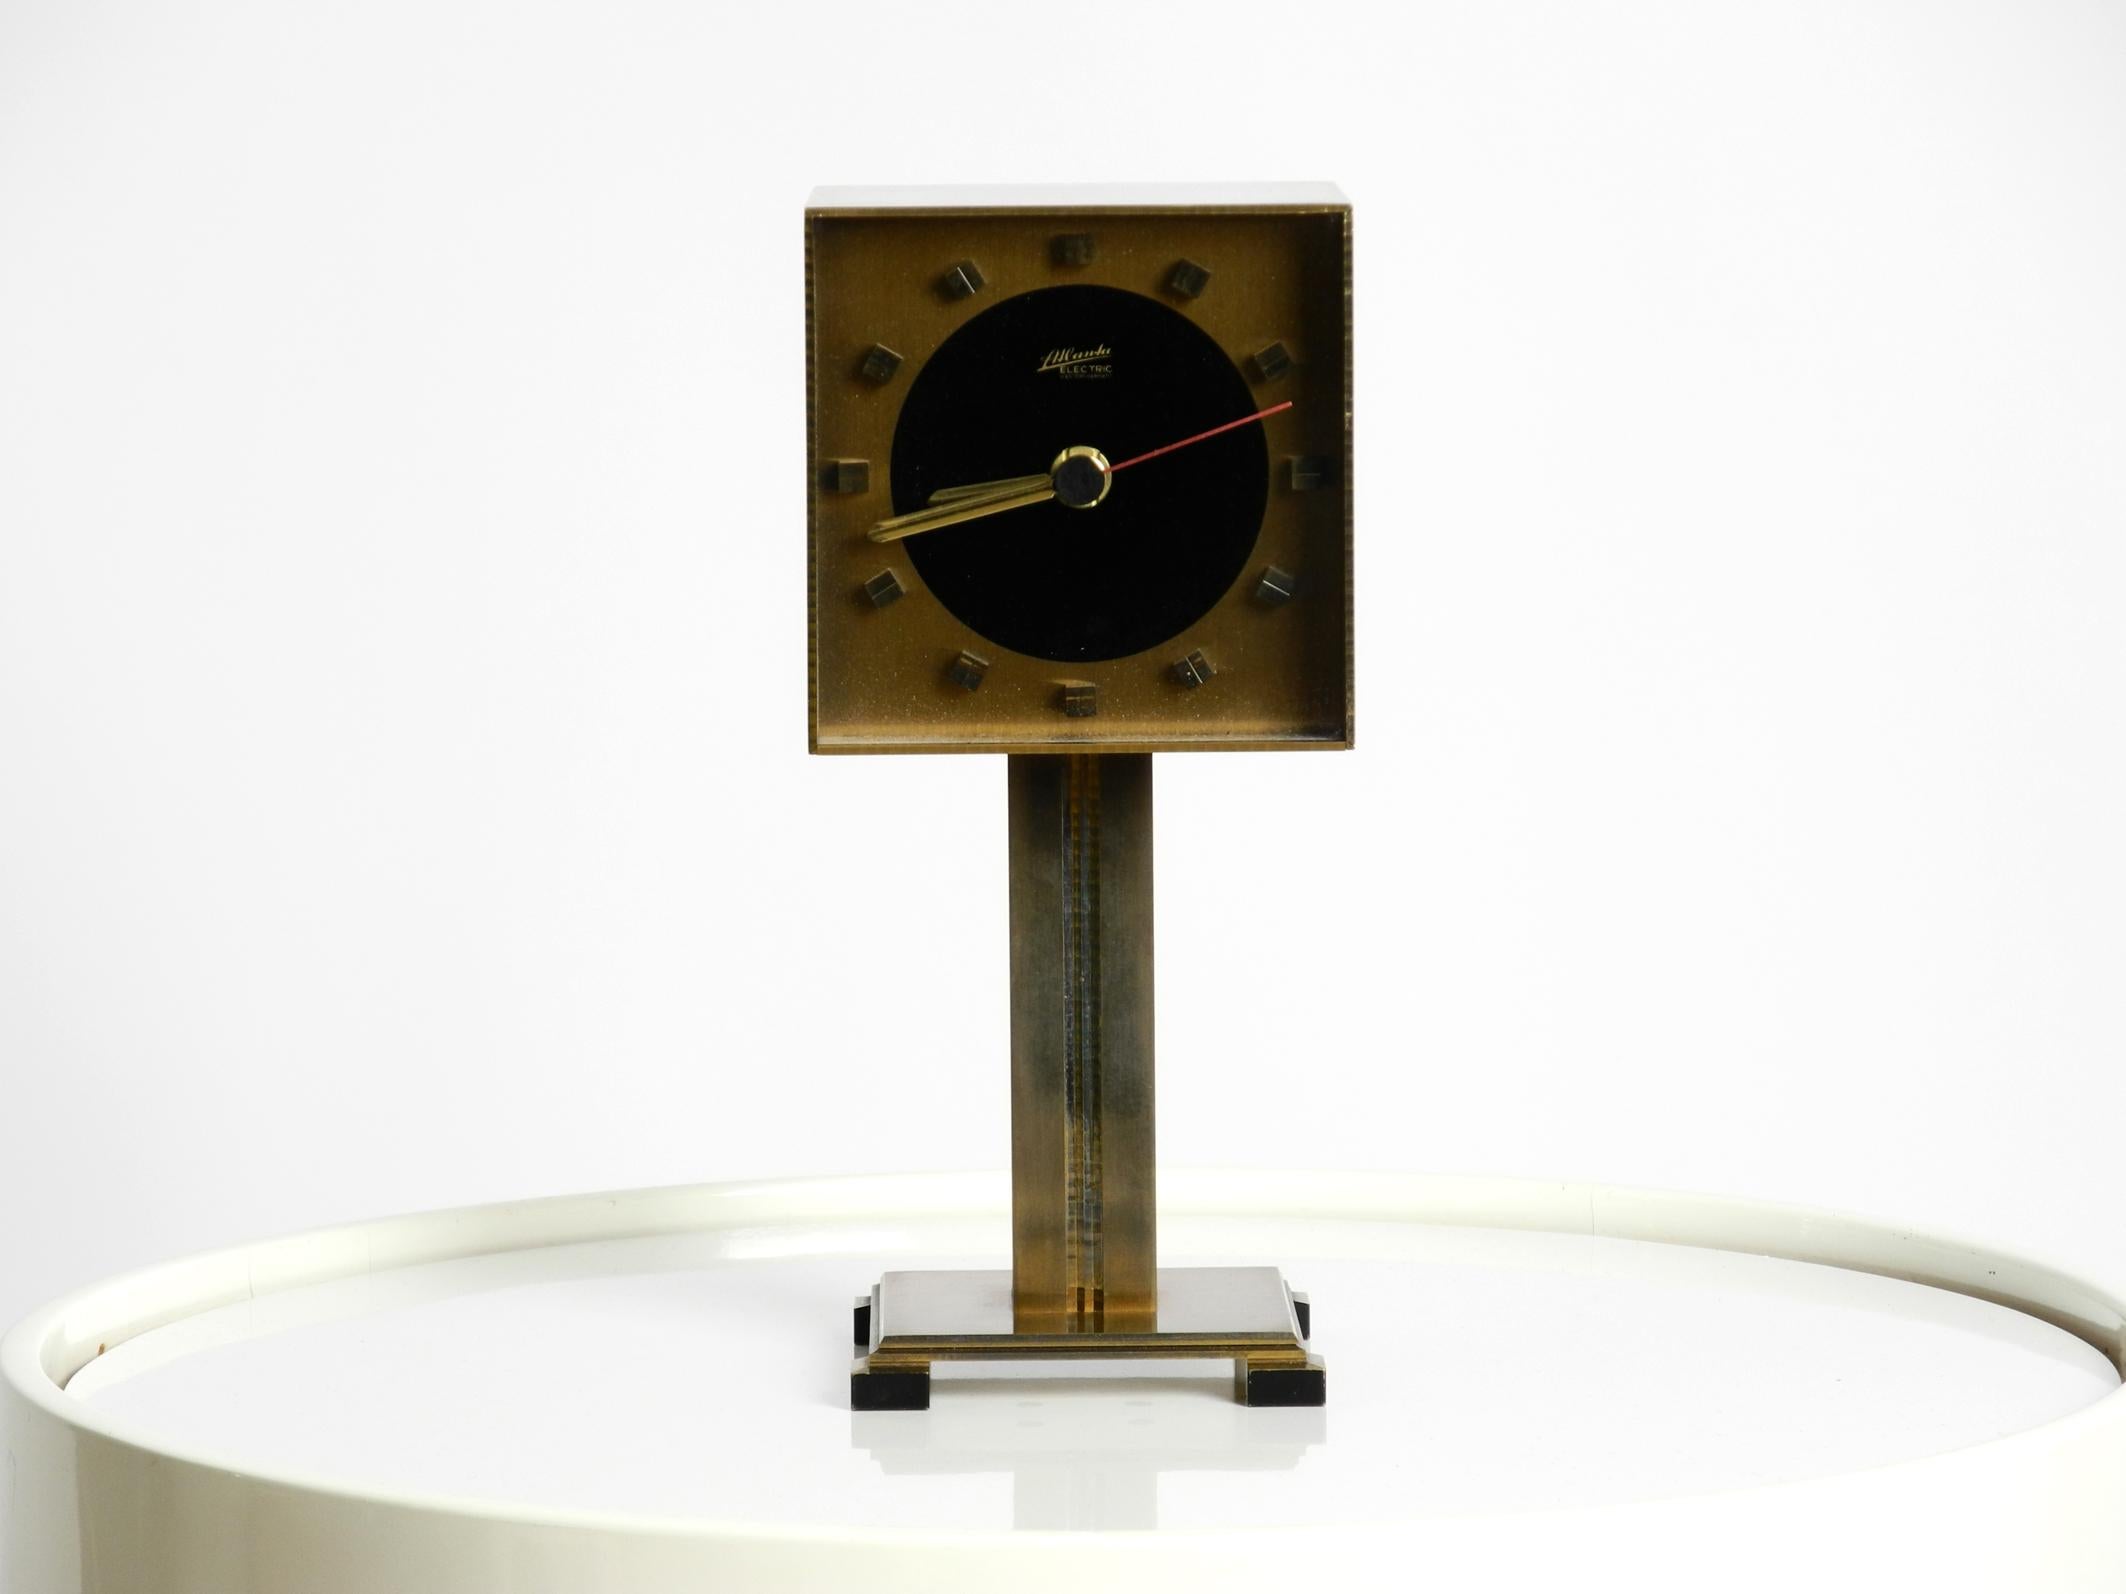 Beautiful and very rare 1960s Atlanta Electric table clock. Made in Germany.
All in brass and in Space Age design.
Very good, clean and well-kept condition with no damage to the entire clock.
No bumps or dents. Not oxidized. Nice light patina.
With